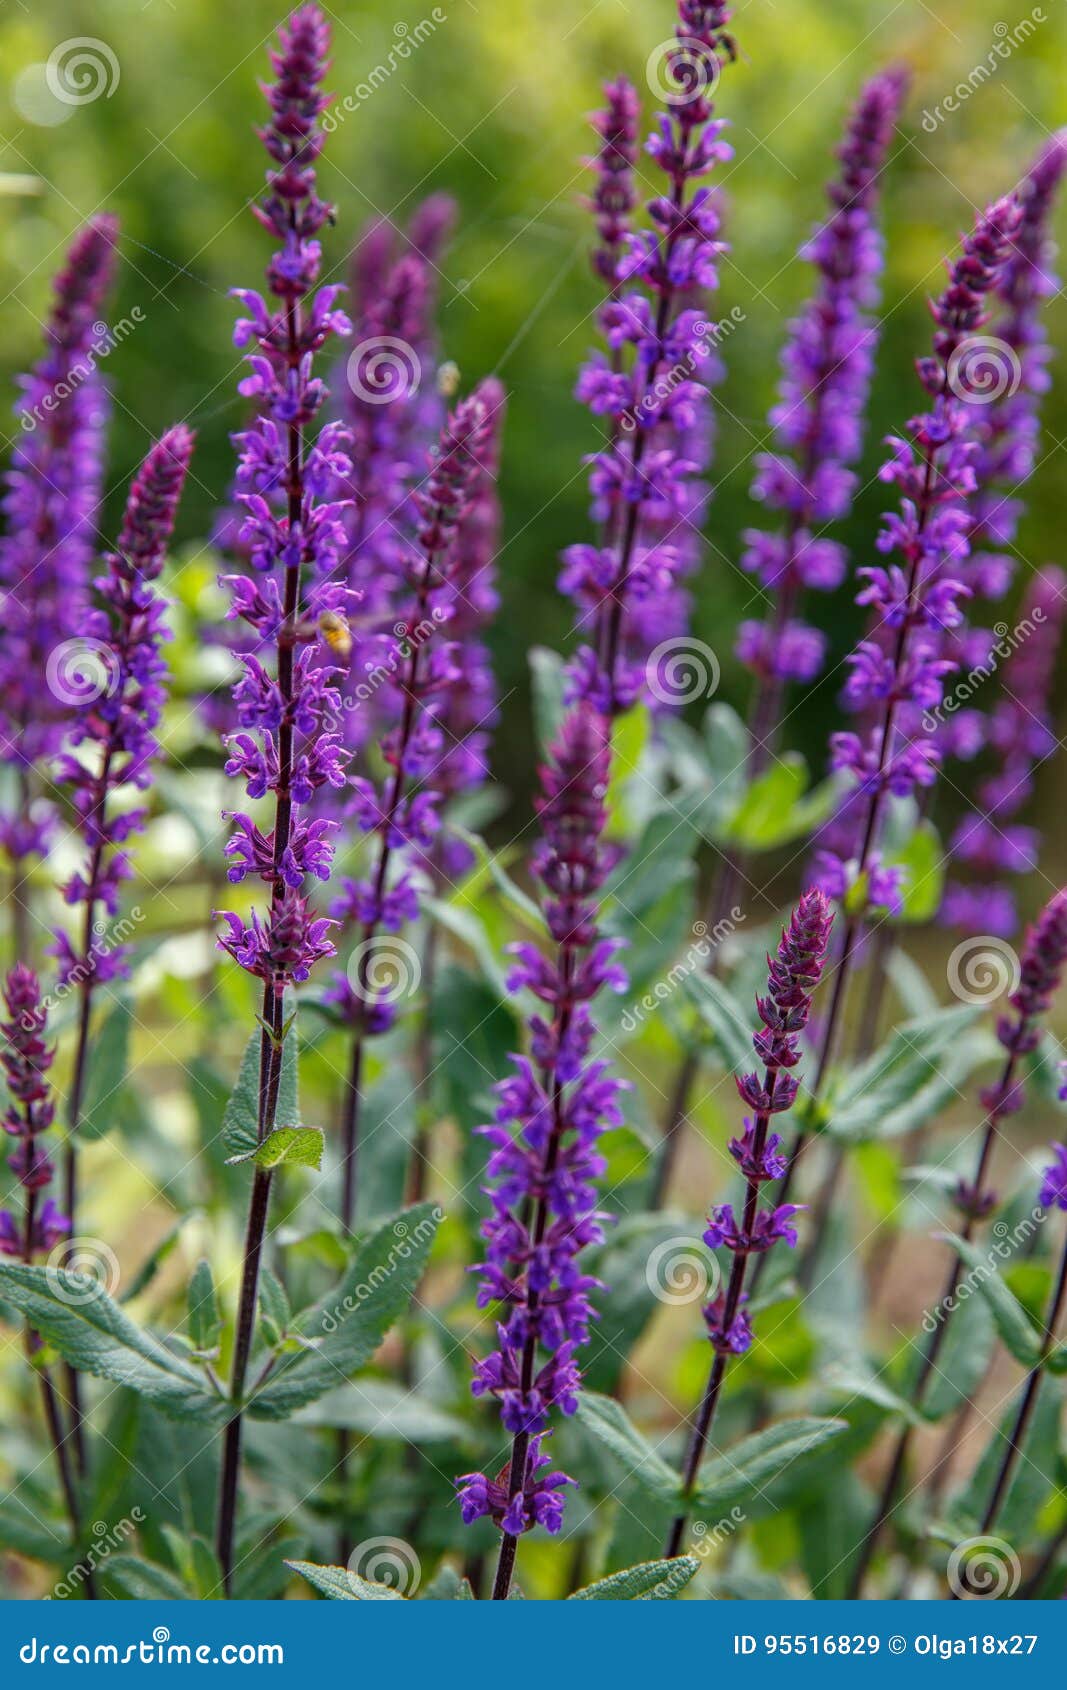 Background Or Texture Of Salvia Nemorosa Caradonna In A Country